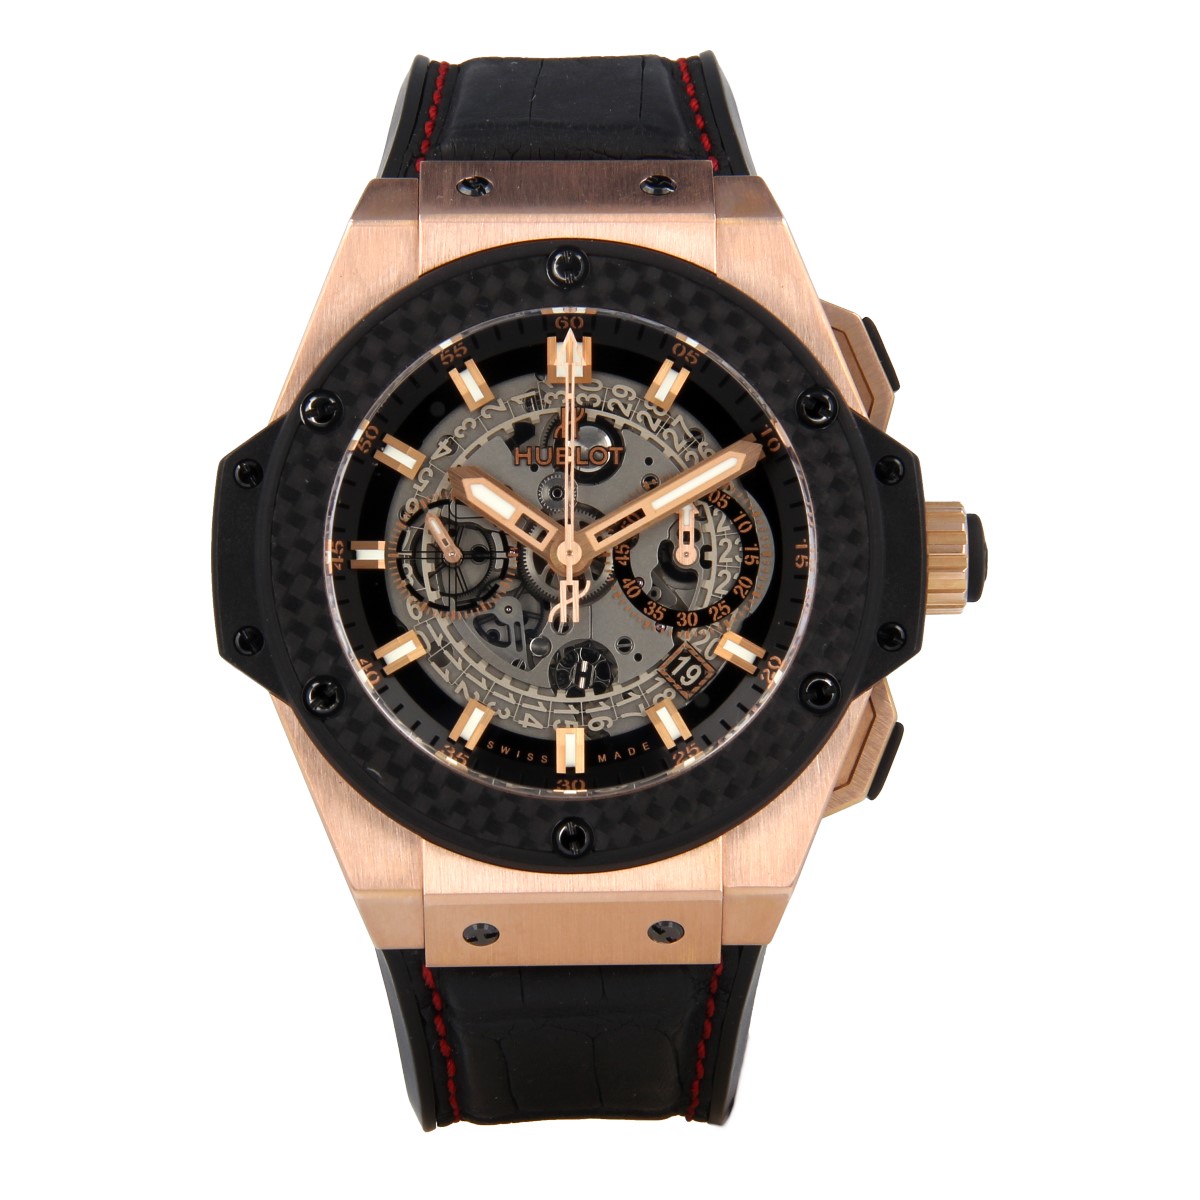 Hublot King Power Unico Chronograph Rose Gold 48mm | Buy pre-owned Hublot watch